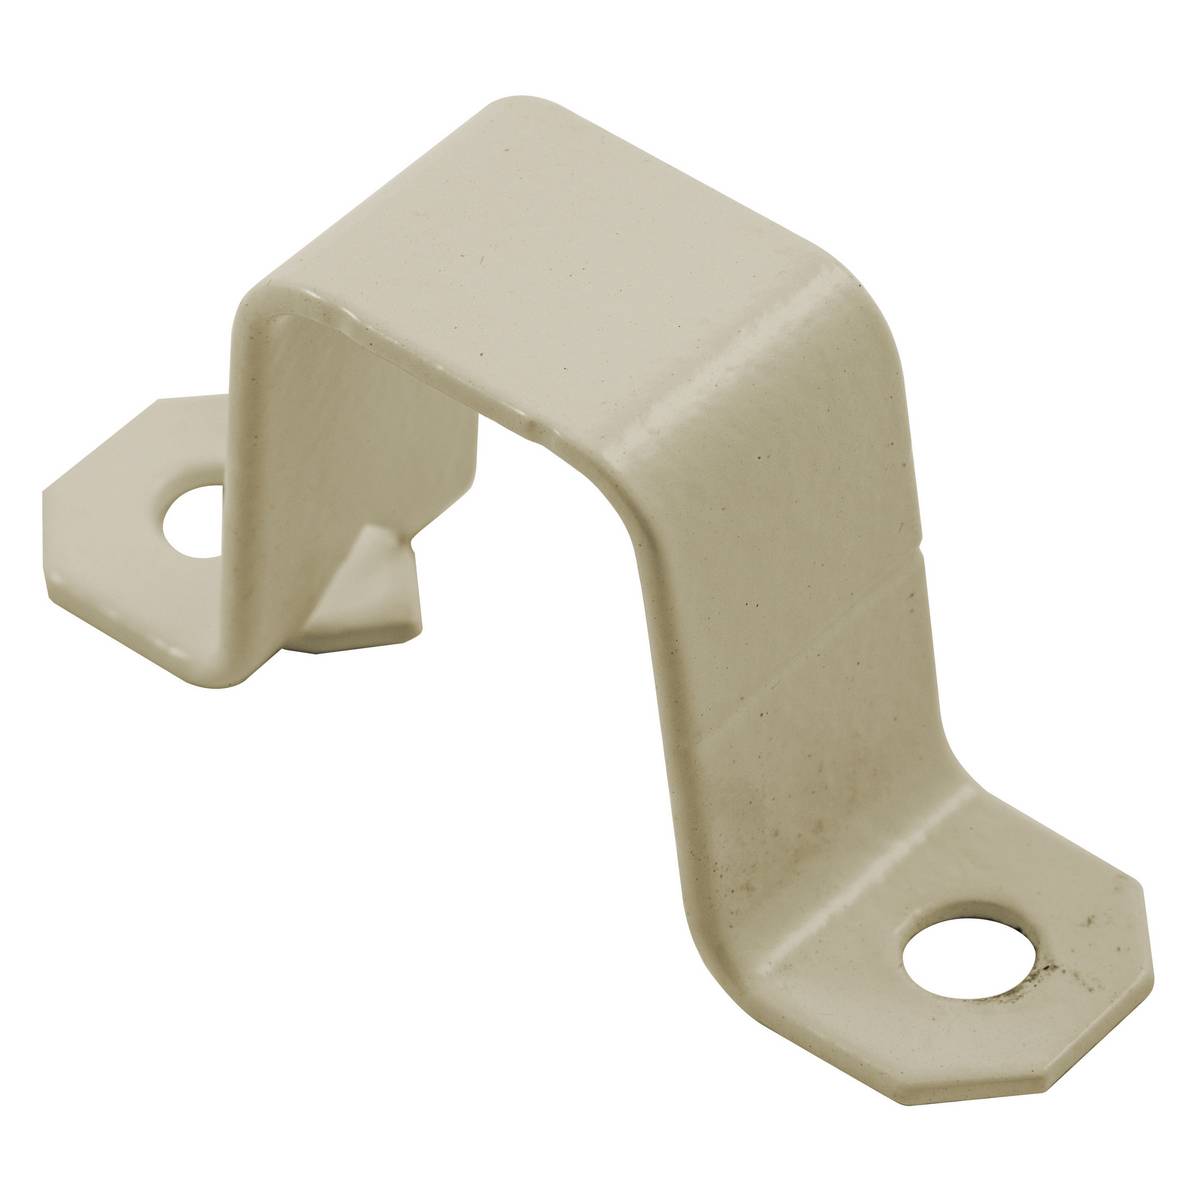 Wiring Device-Kellems HBL7504IV Standard Mounting Strap, For Use With HBL750 Series Metal Raceways, 1/2 Holes, Rolled Steel